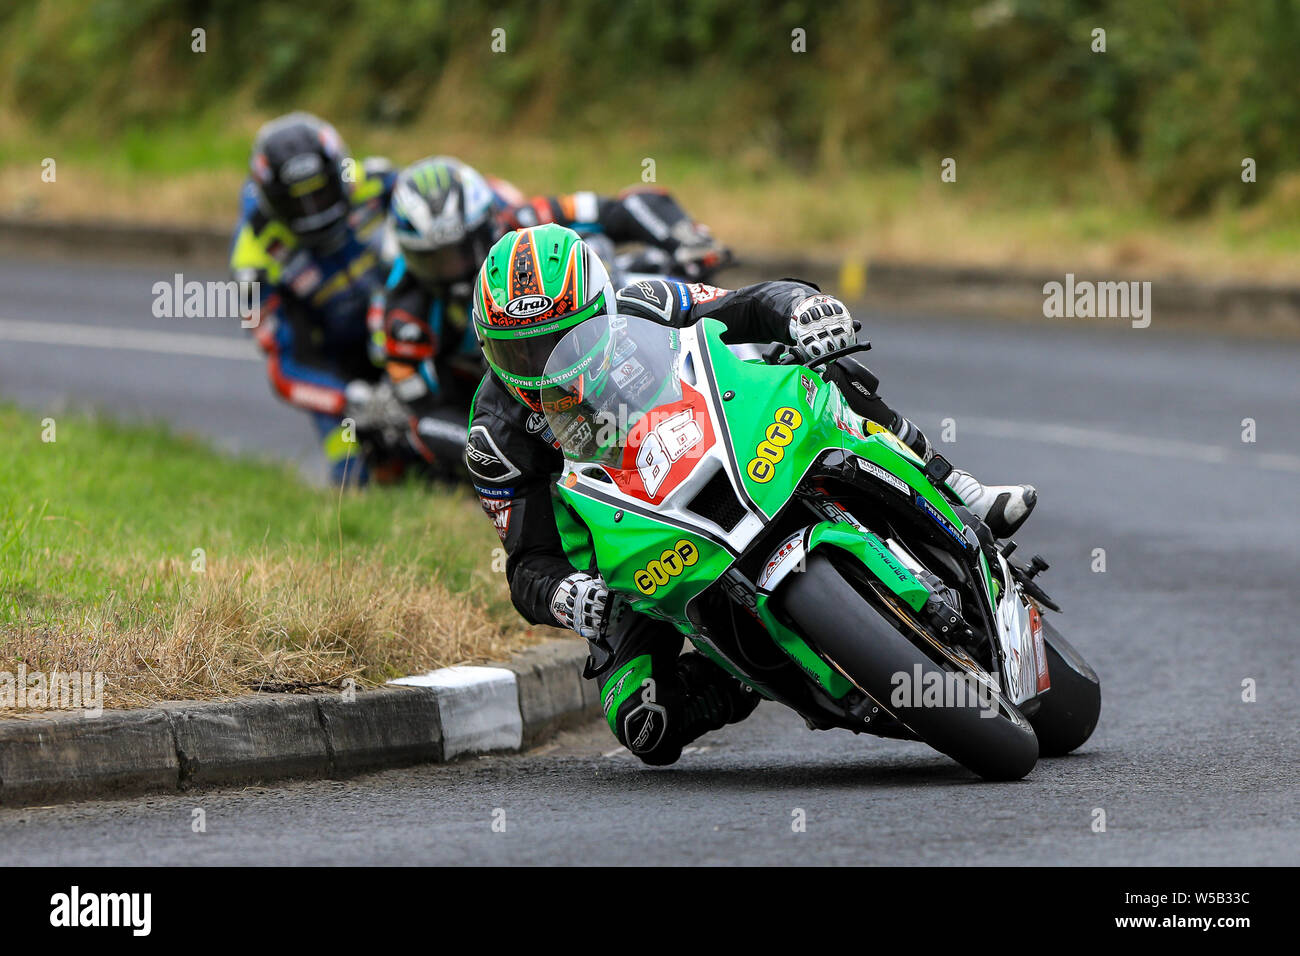 Armoy, Northern Ireland. 27th July, 2019. Armoy Road Races The Race of Legends; Derek McGee (NJ Doyne/ McGee Kawasaki) leads Michael Dunlop and Derek Shiels during the early stages of The Race of Legends Credit: Action Plus Sports/Alamy Live News Stock Photo